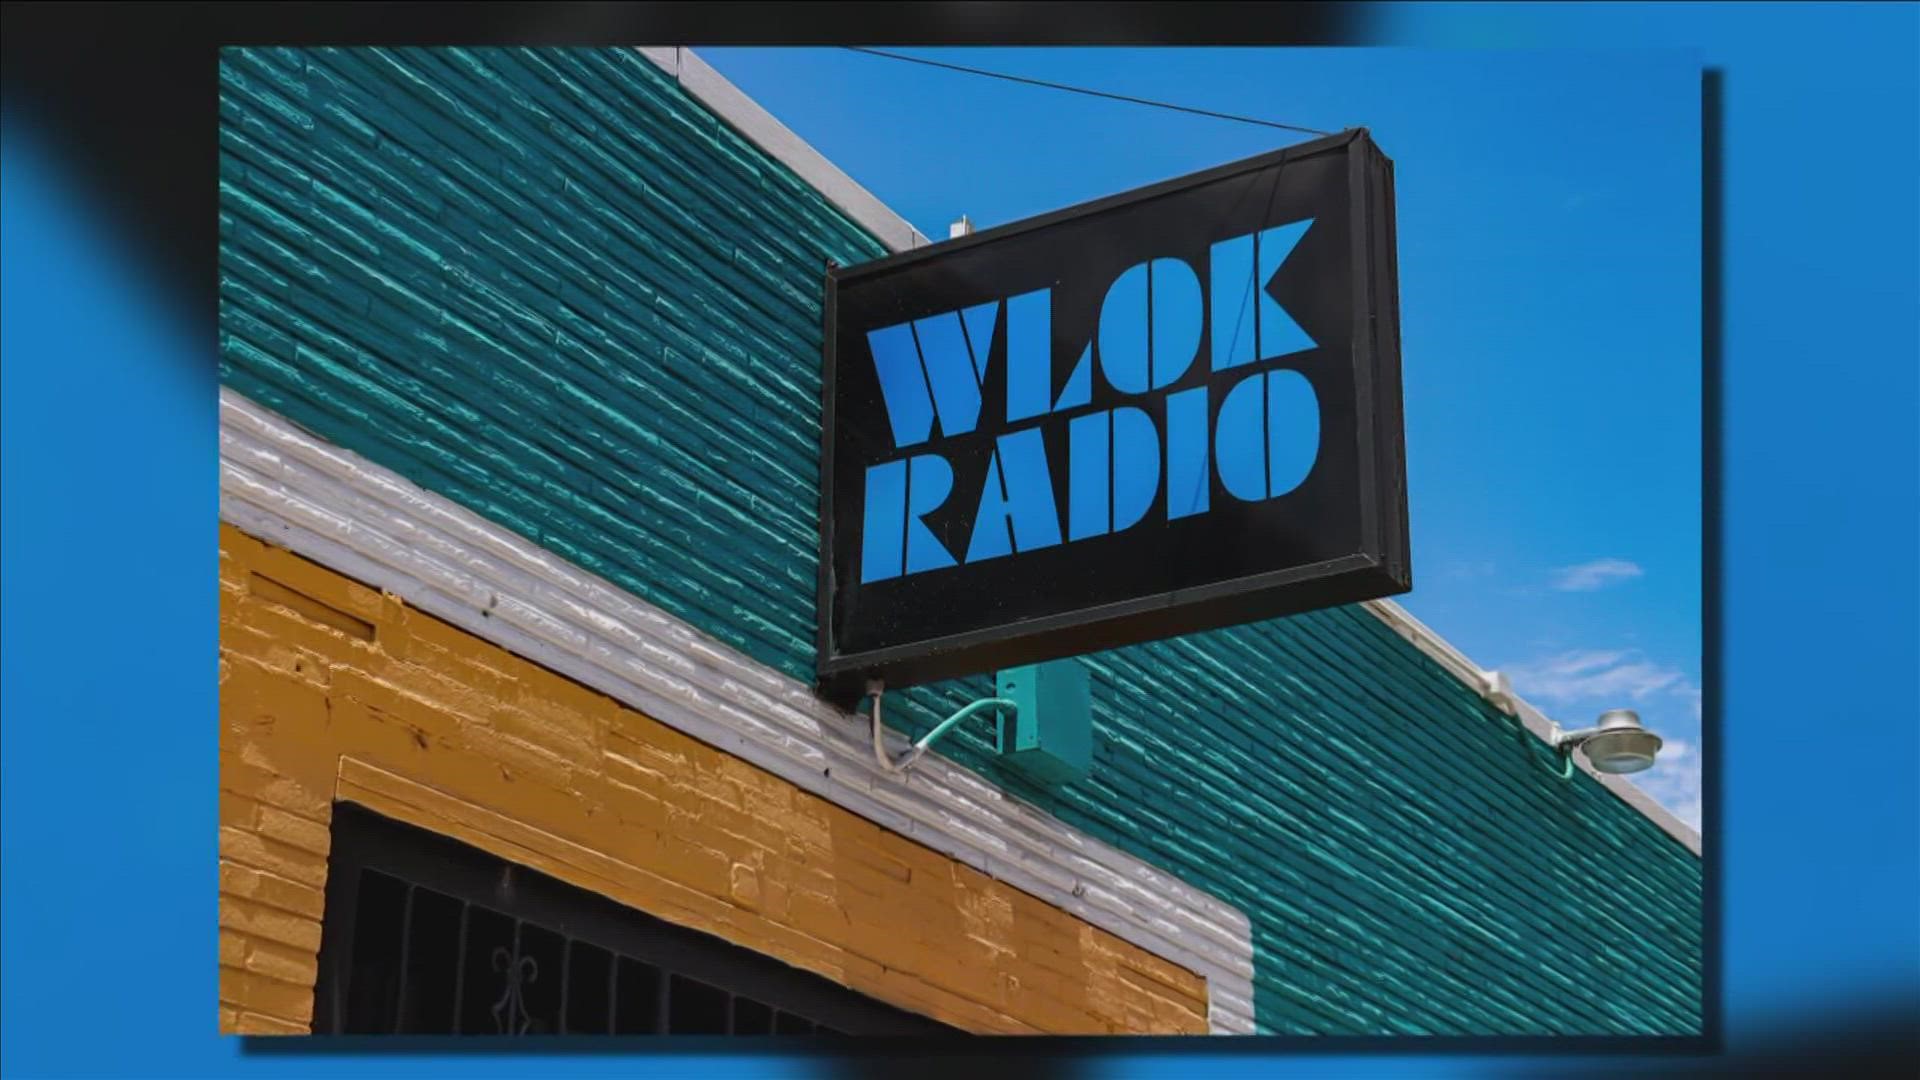 With a 50,000 grant from Downtown Memphis Commission, WLOK radio station can begin renovations on its downtown location.